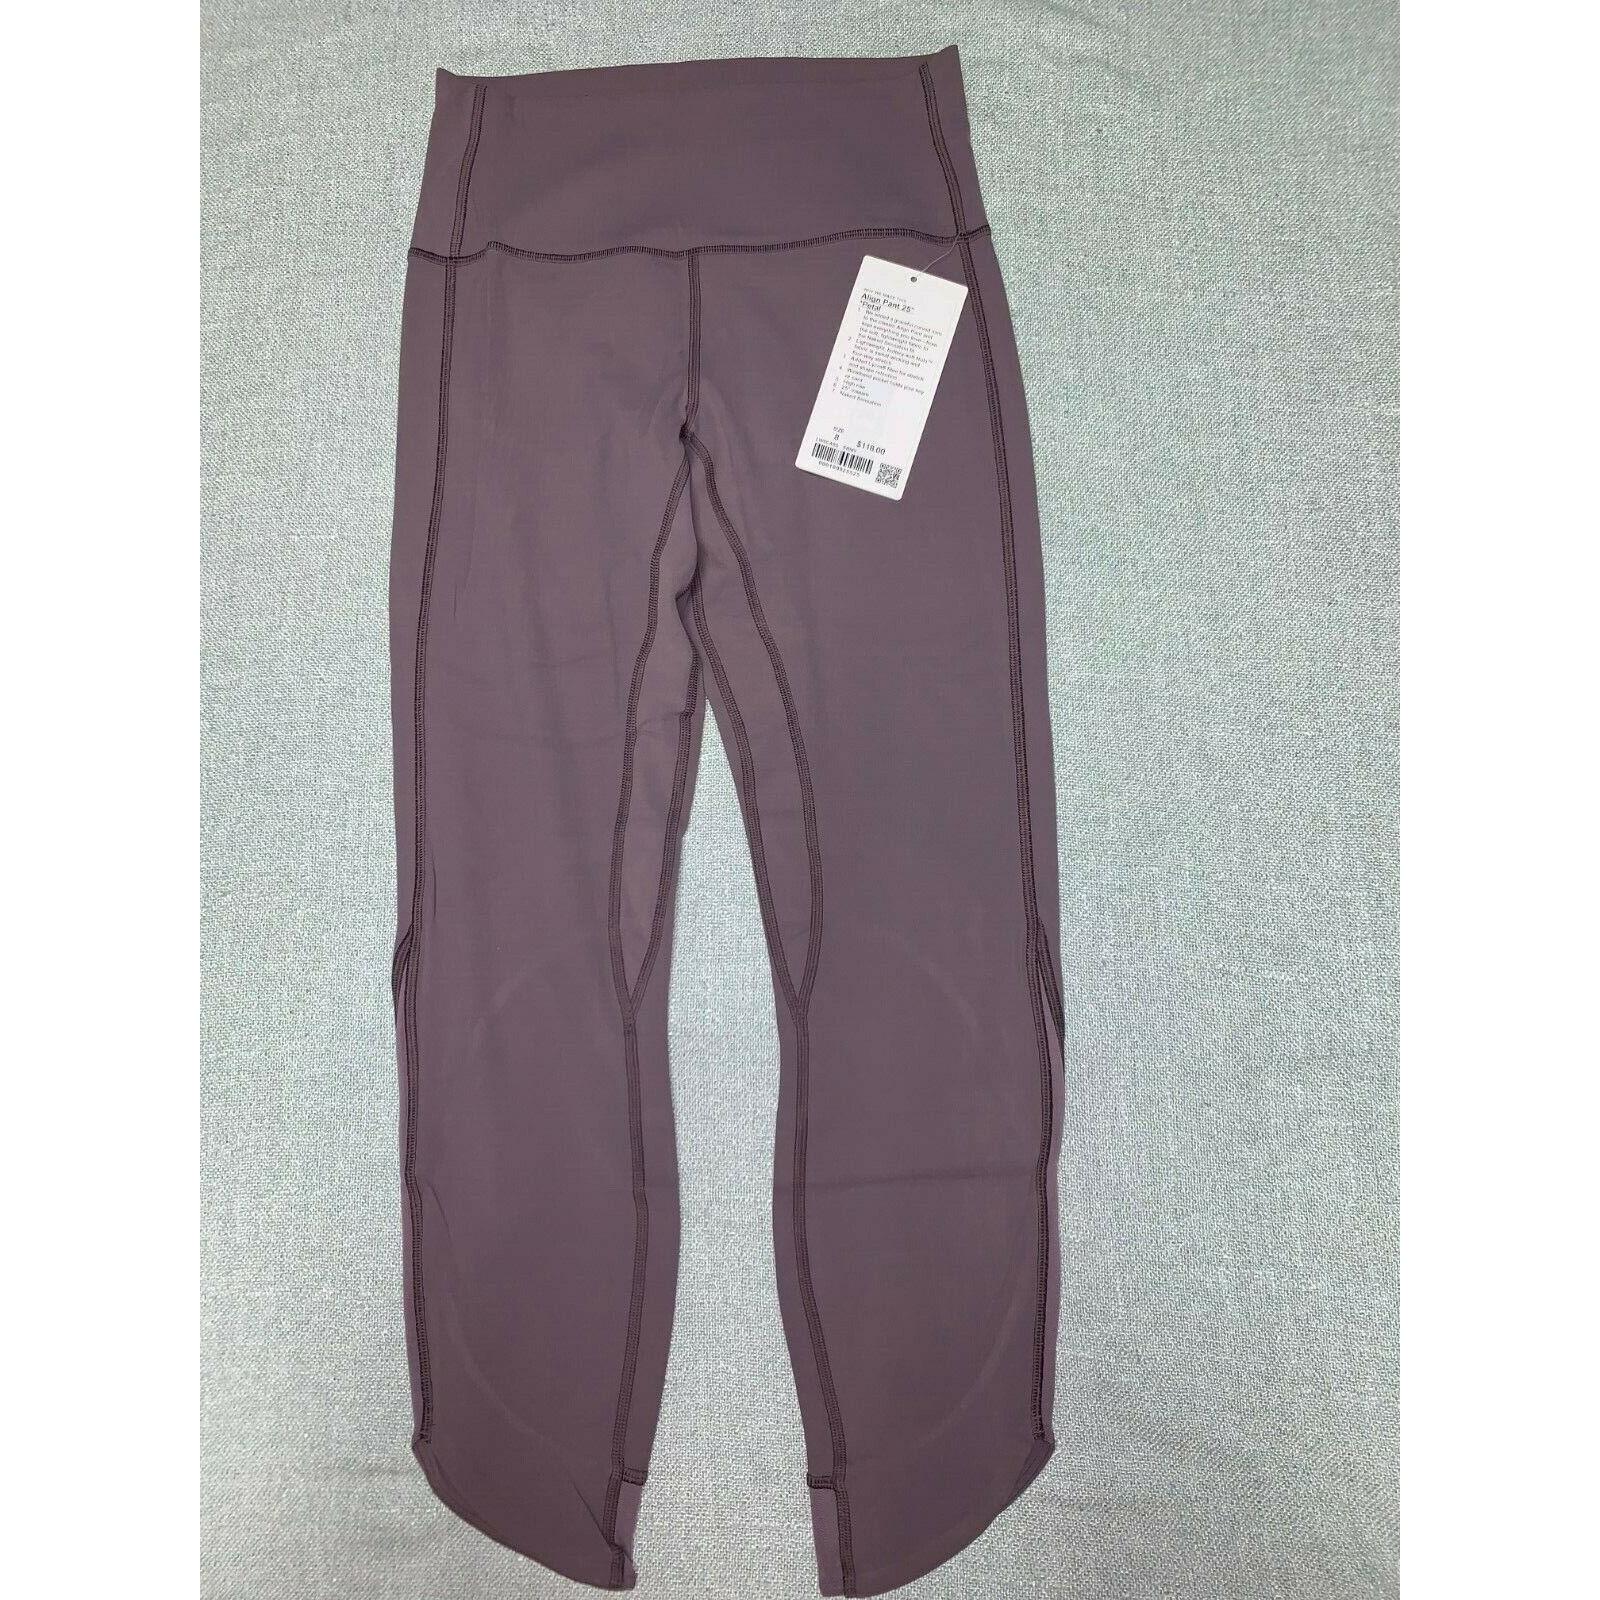 Lululemon Align Pant 25 Petal Frosted Mulberry Size 8